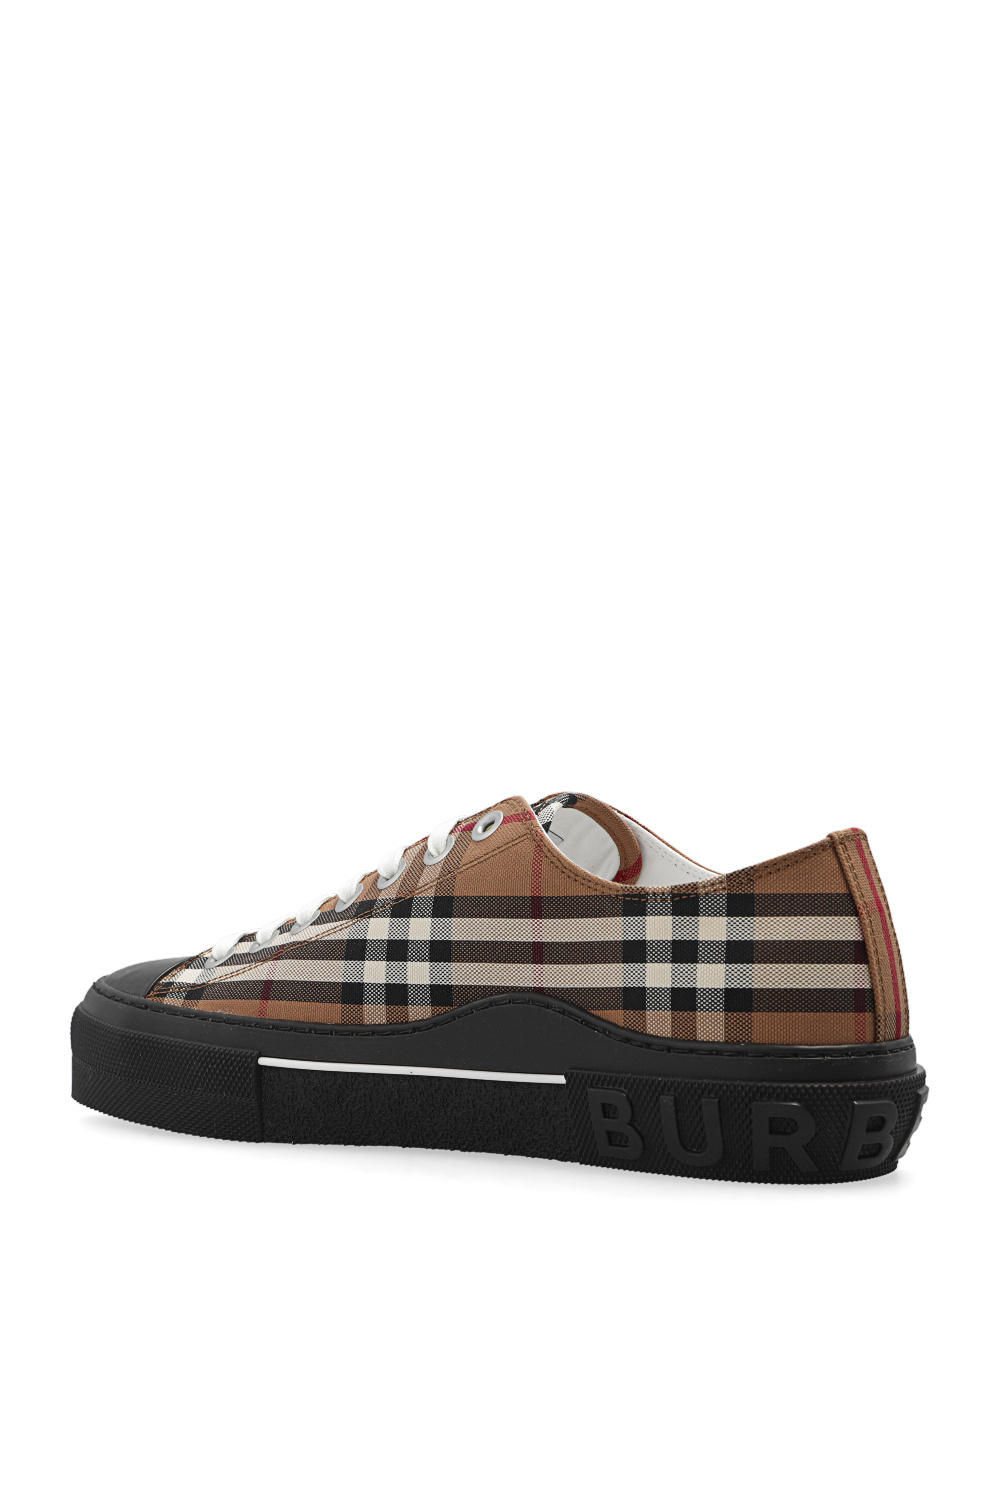 burberry Continental ‘Jack’ sneakers